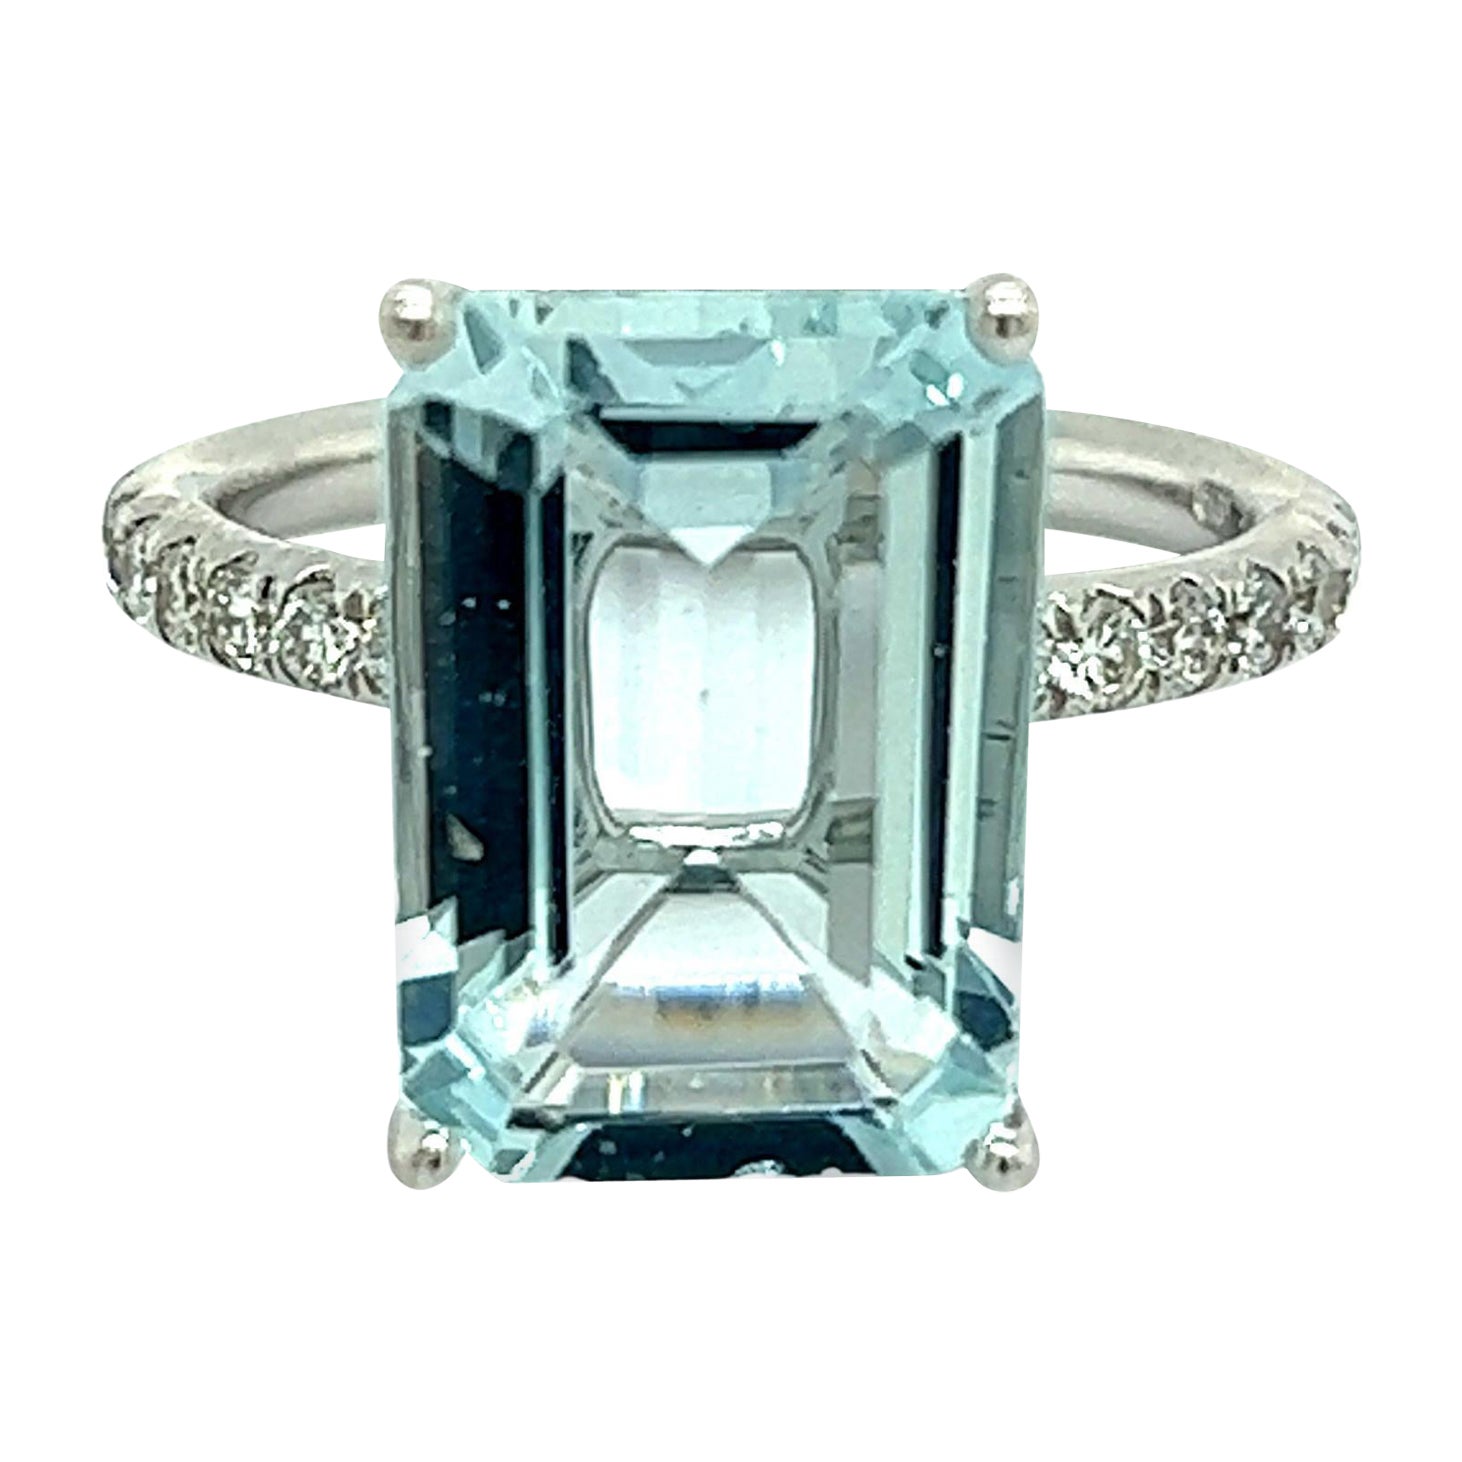 Natural Aquamarine Diamond Ring 14k W Gold 5.78 TCW Certified For Sale